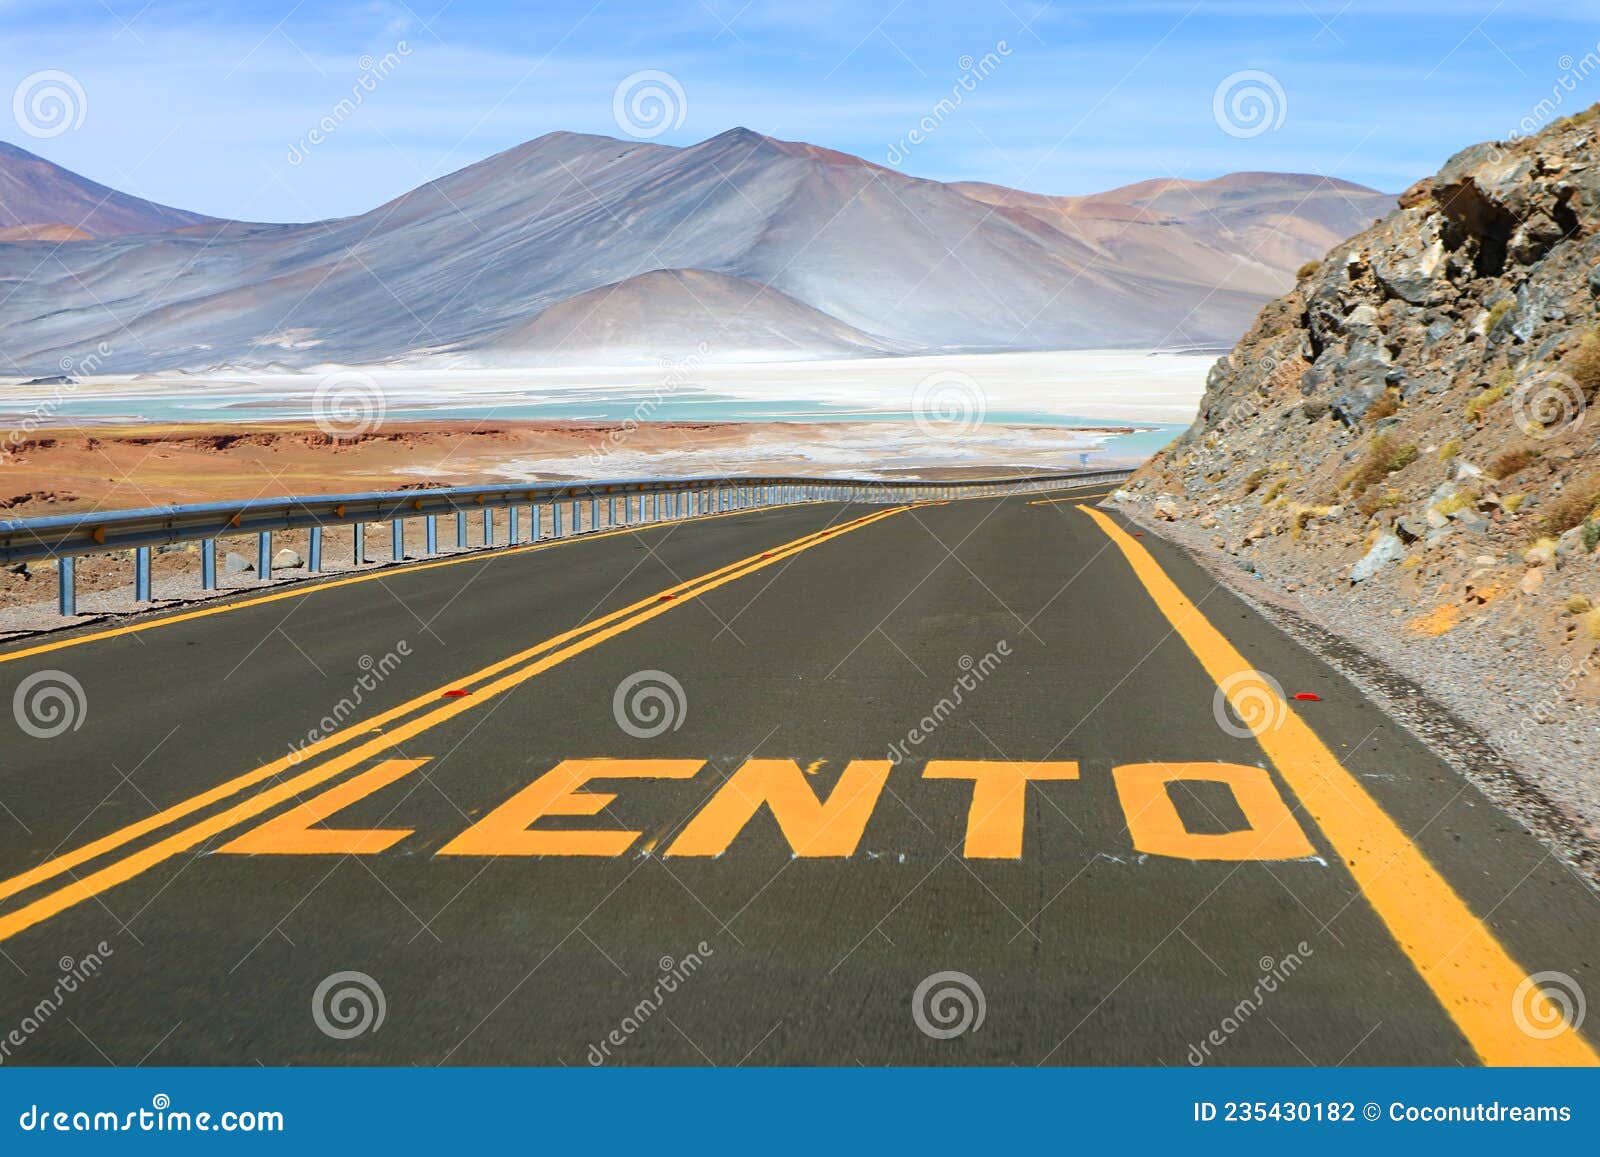 desert road with the word lento means slow in spanish along salar de talar salt lakes in los flamencos national reserve, chile